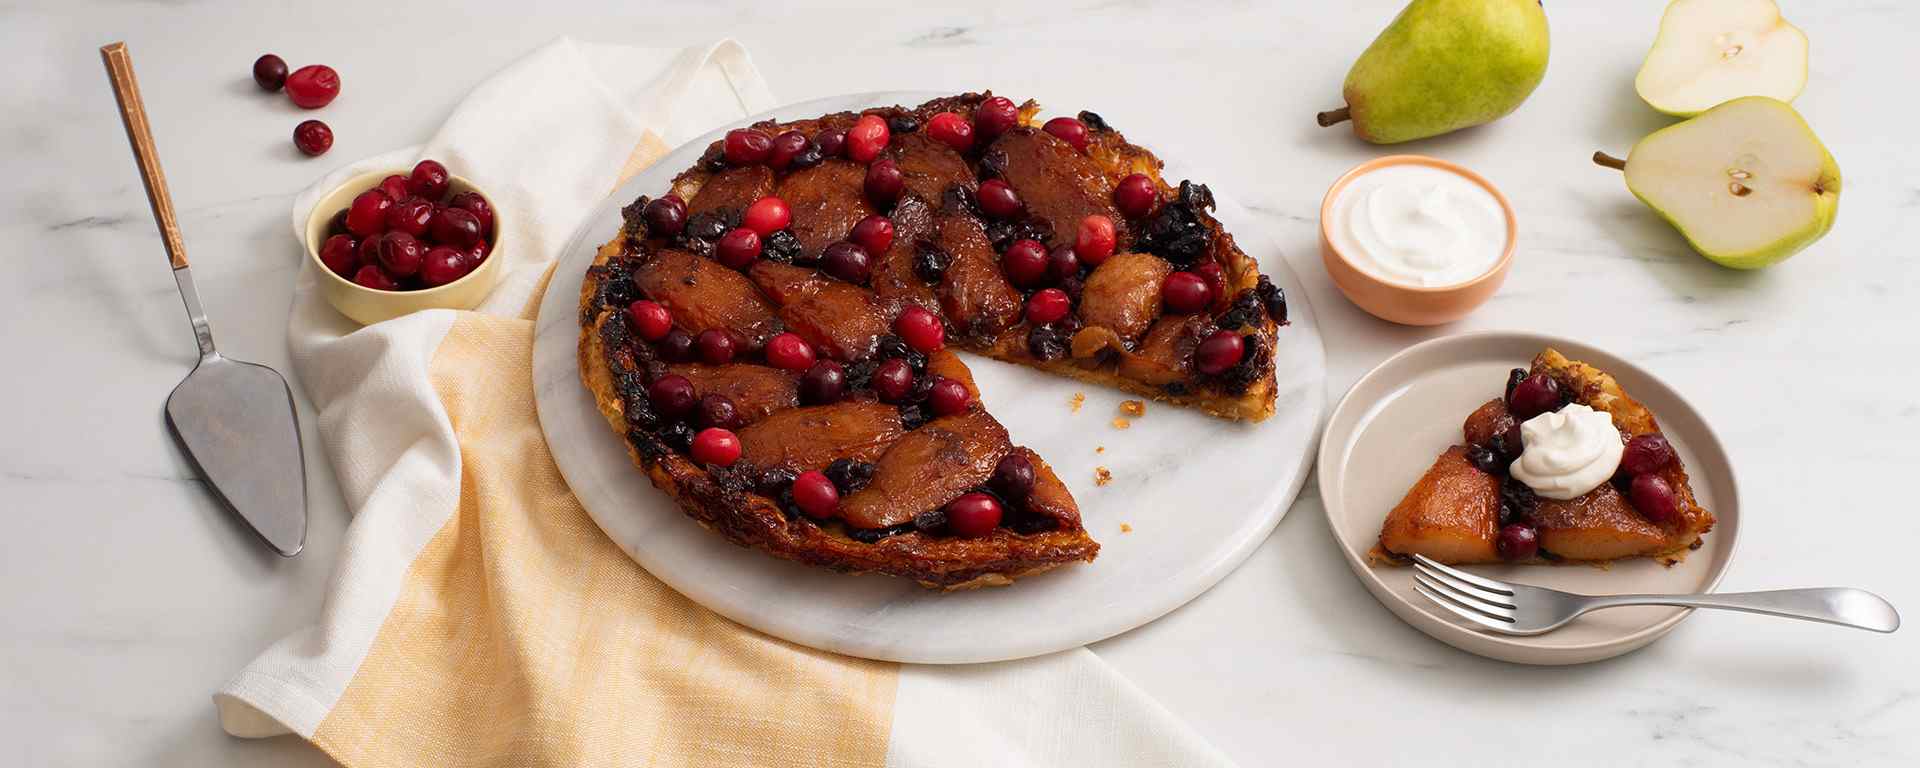 Photo of - Spiced Pear and Cranberry Tart Tatin